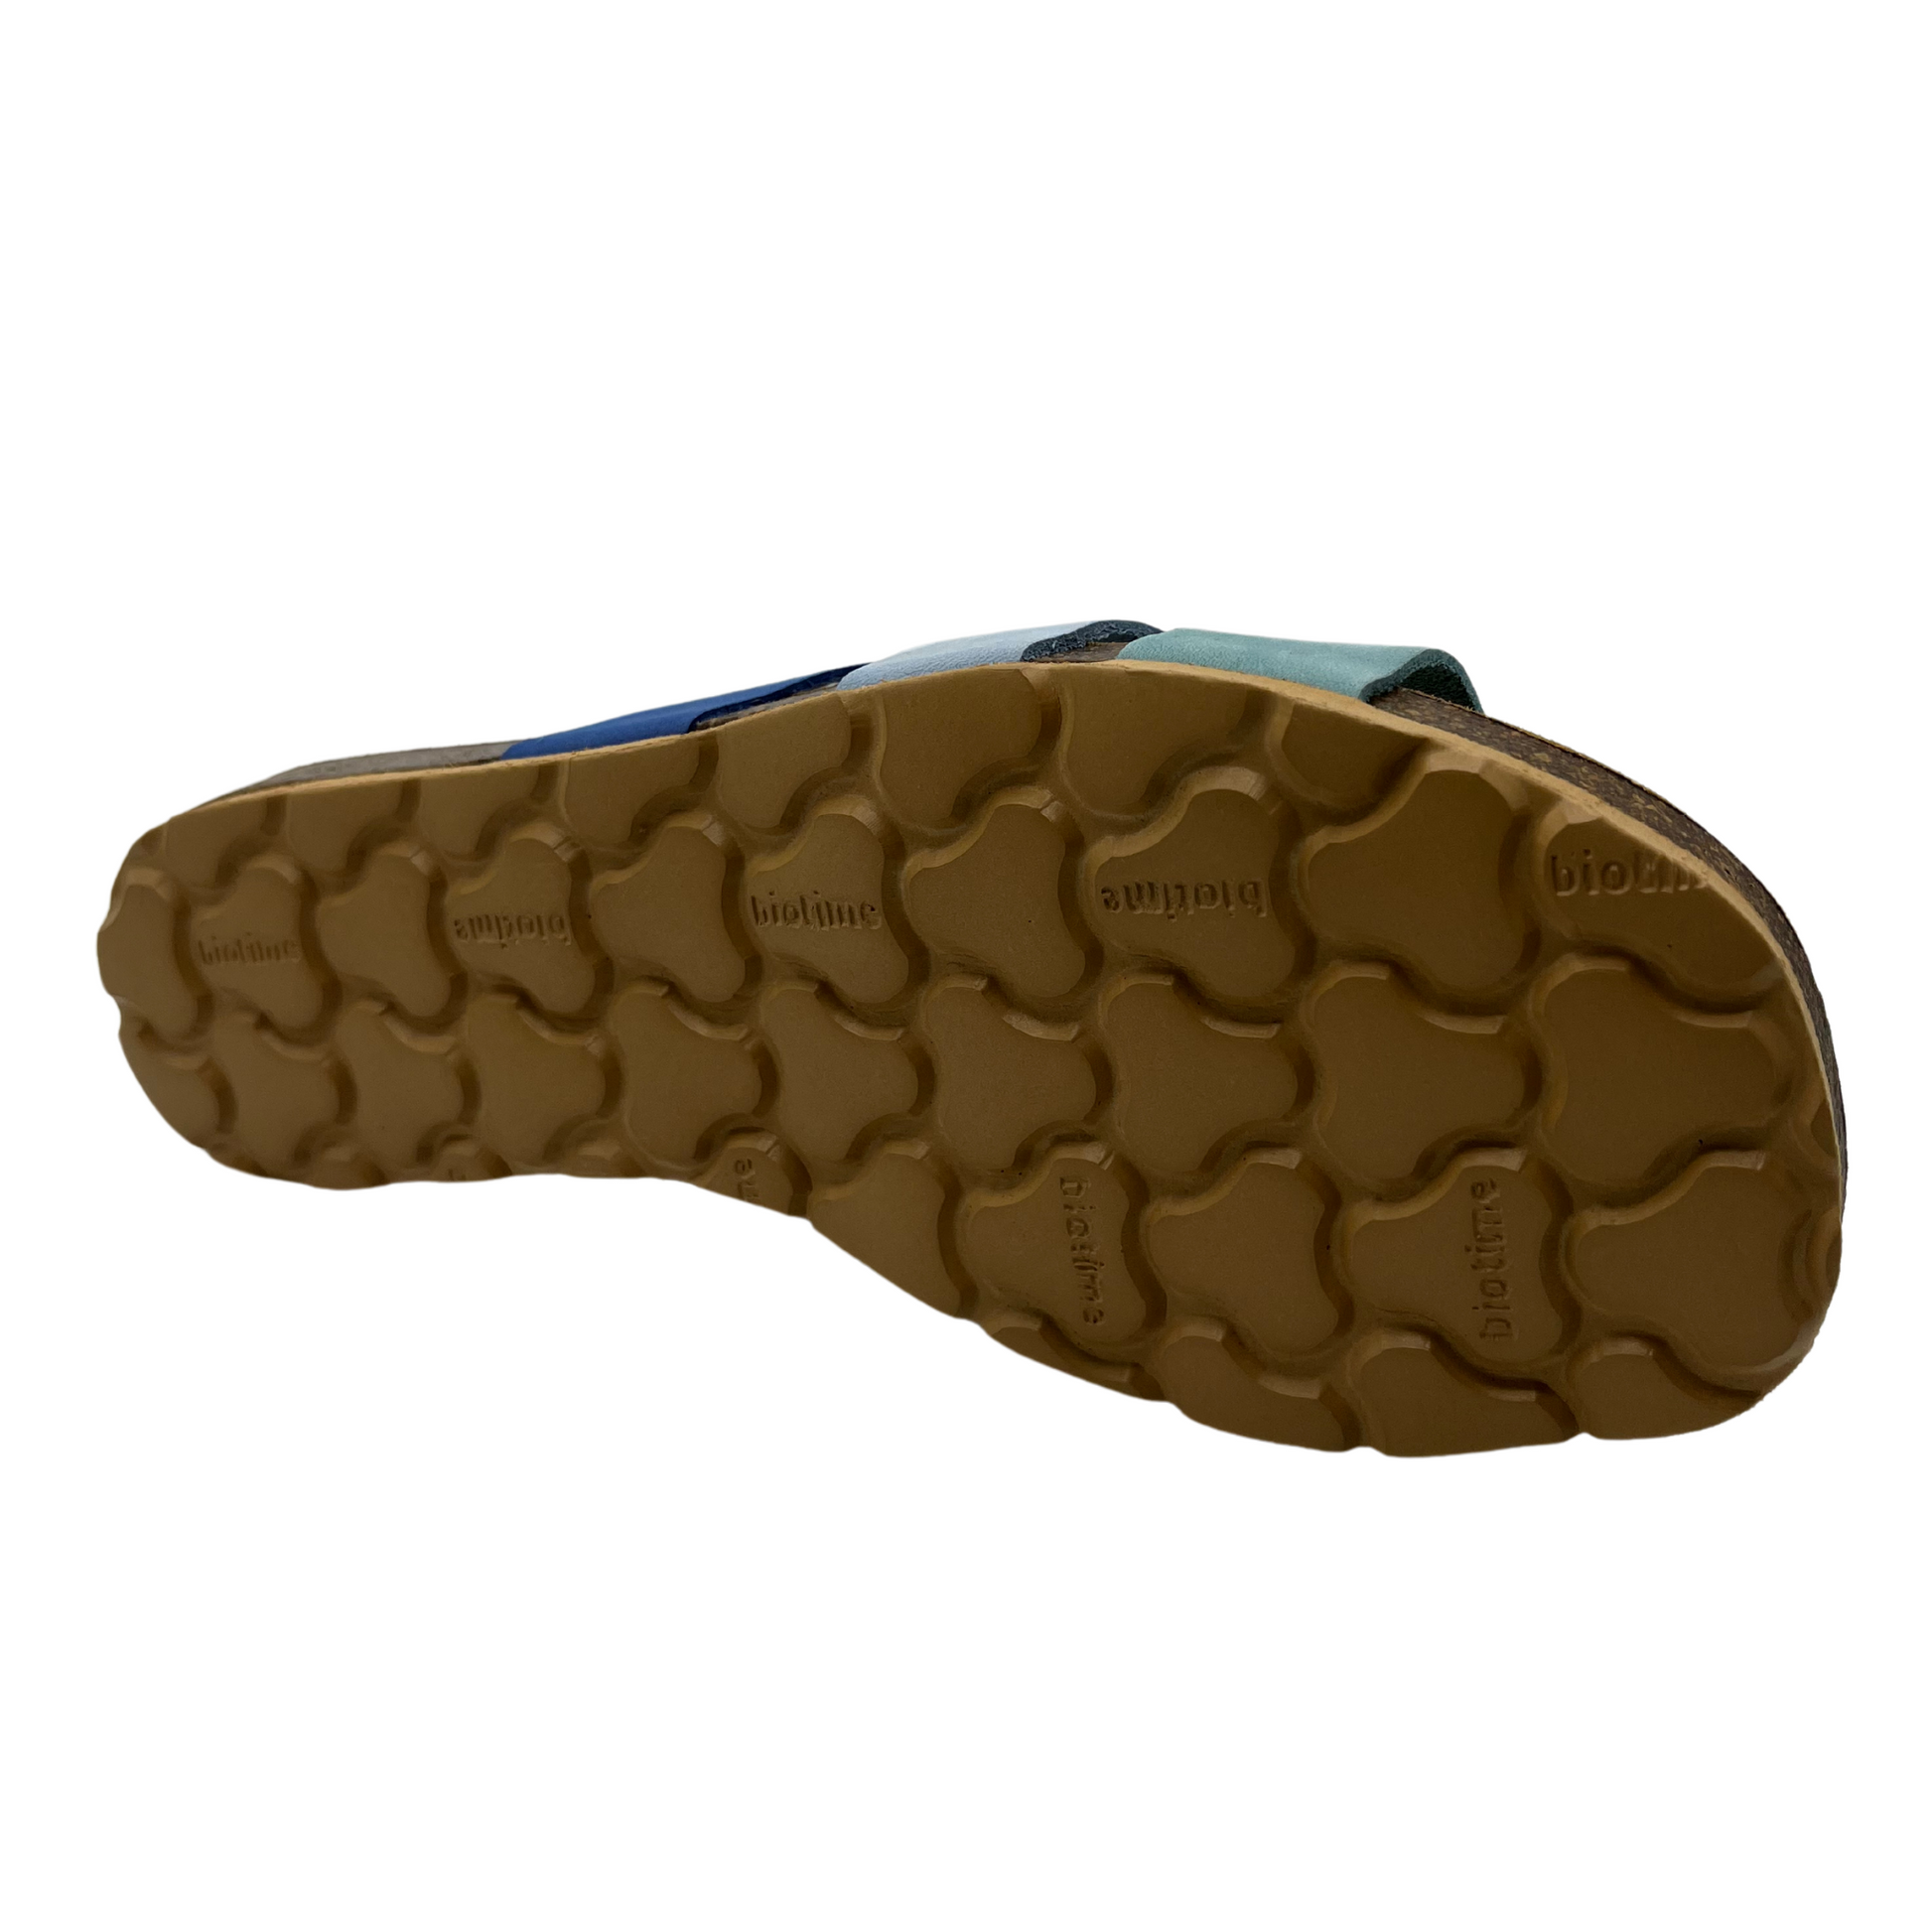 Bottom view of blue suede slip on sandal with suede lined contoured footbed